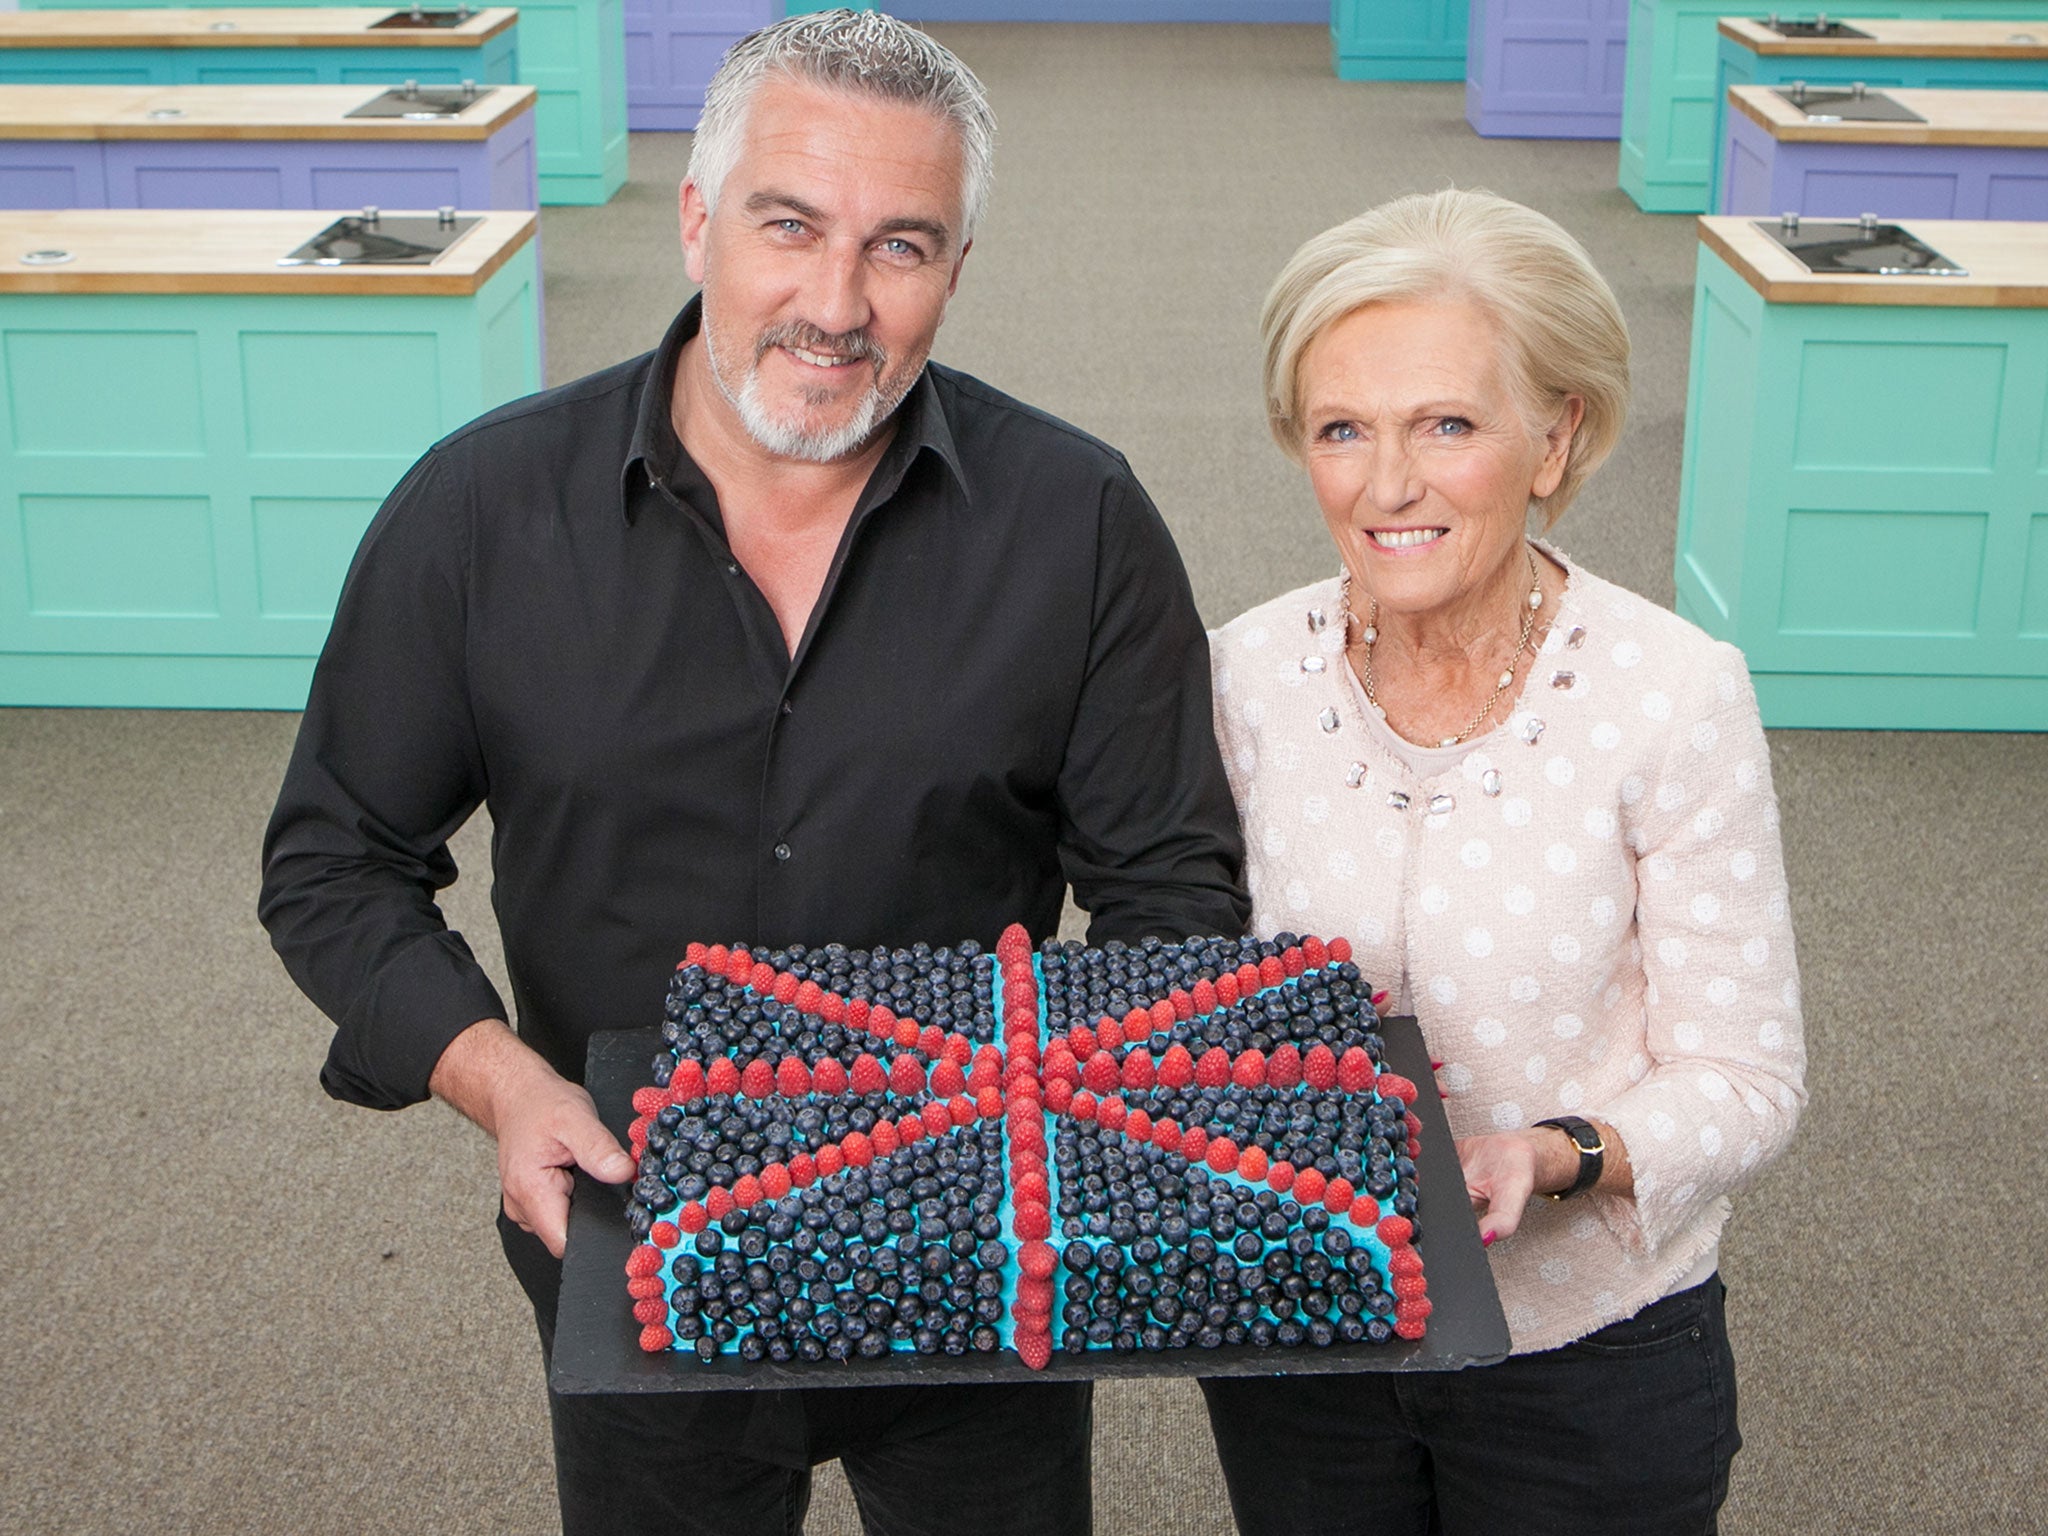 It is believed that Channel 4 has agreed to pay a total of about £75 million in three annual £25 million instalments to secure Bake Off